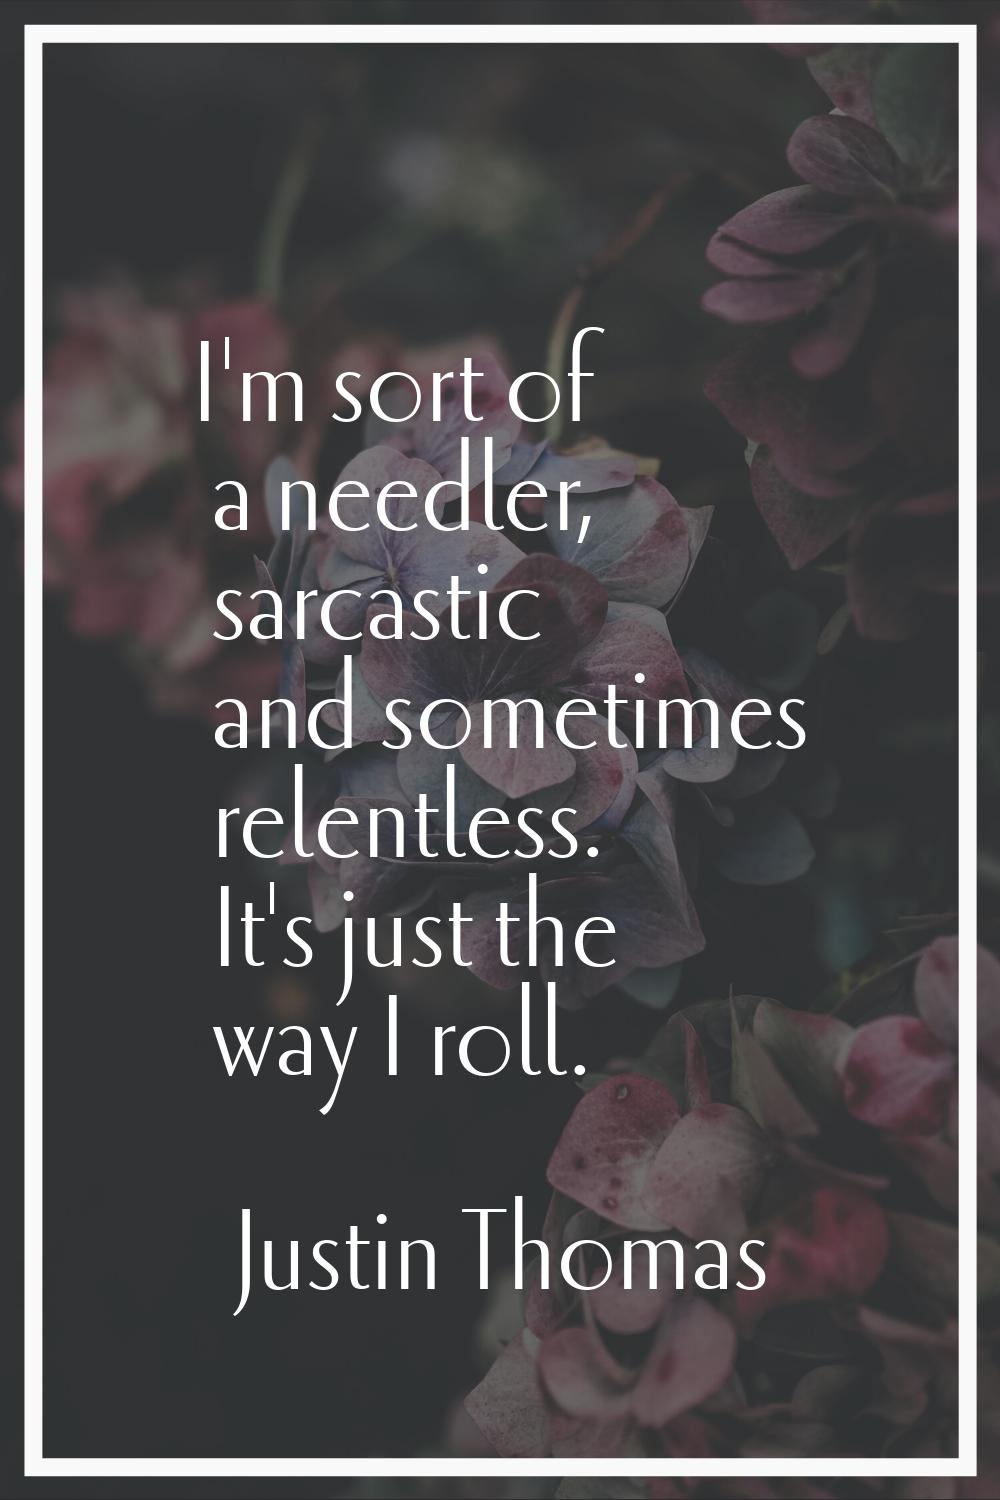 I'm sort of a needler, sarcastic and sometimes relentless. It's just the way I roll.